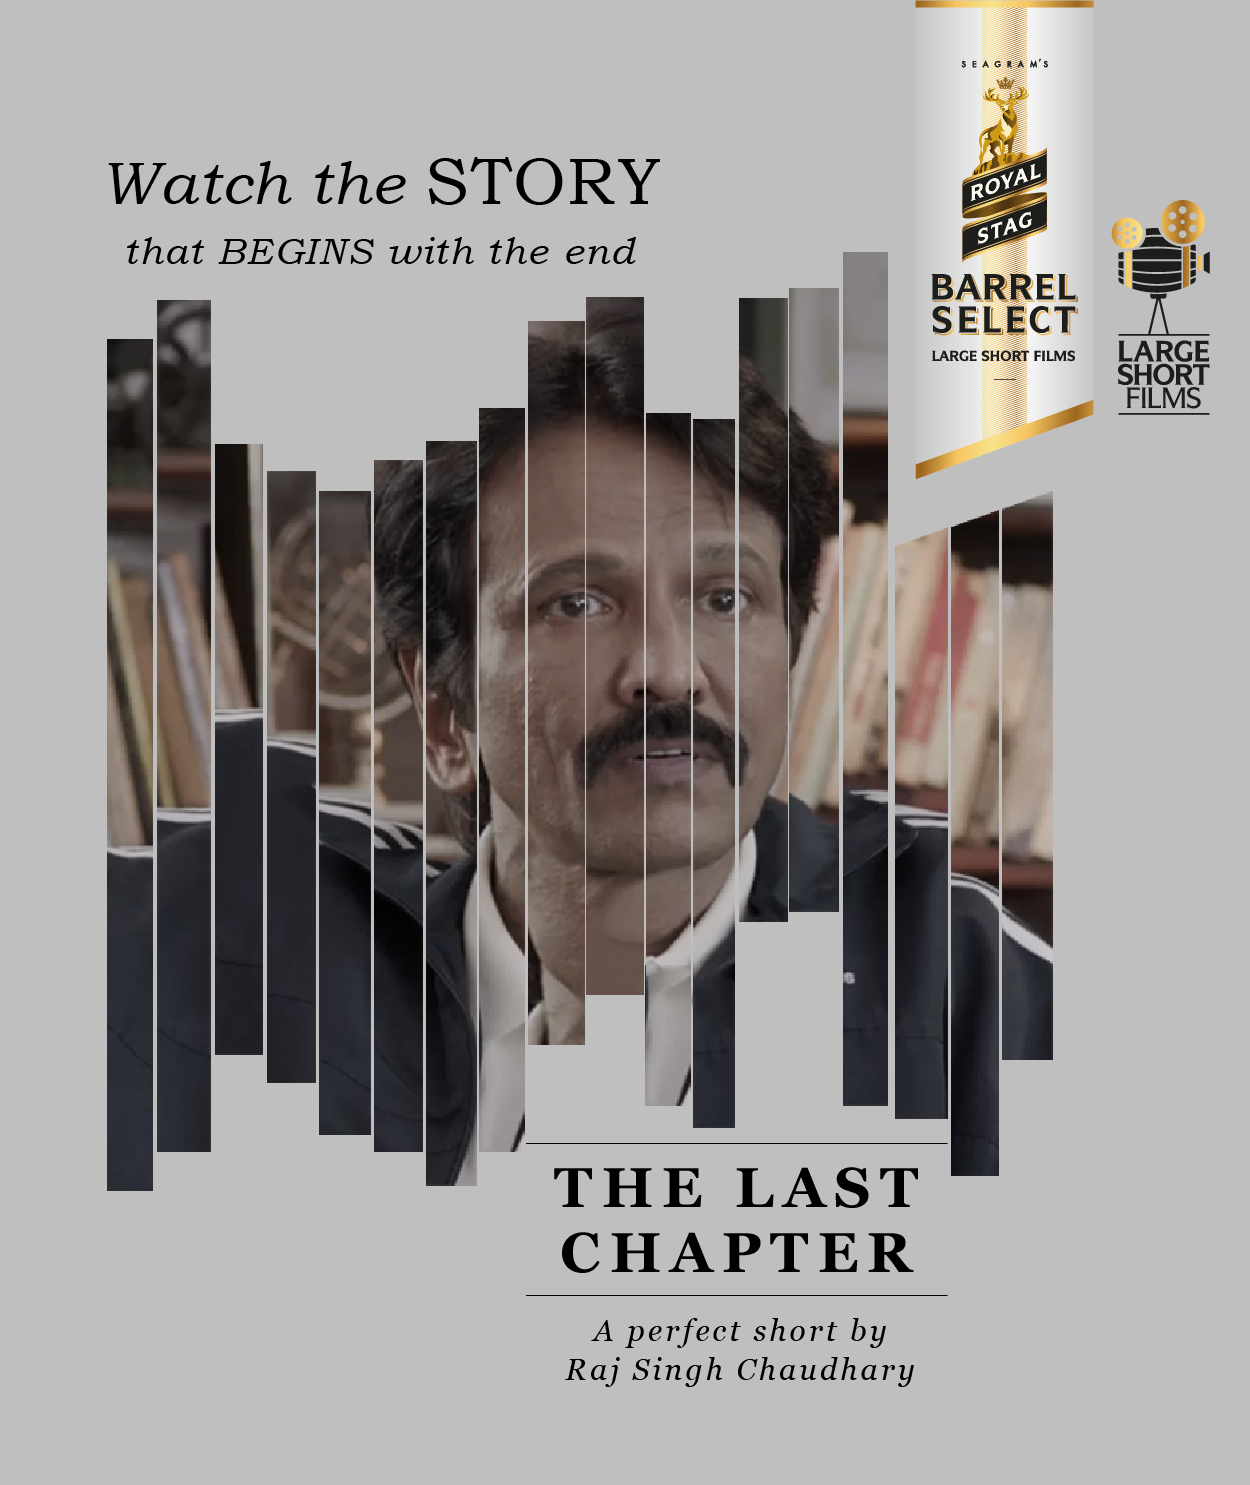 Royal Stag Barrel Select Large Short films presents 'The Last Chapter'